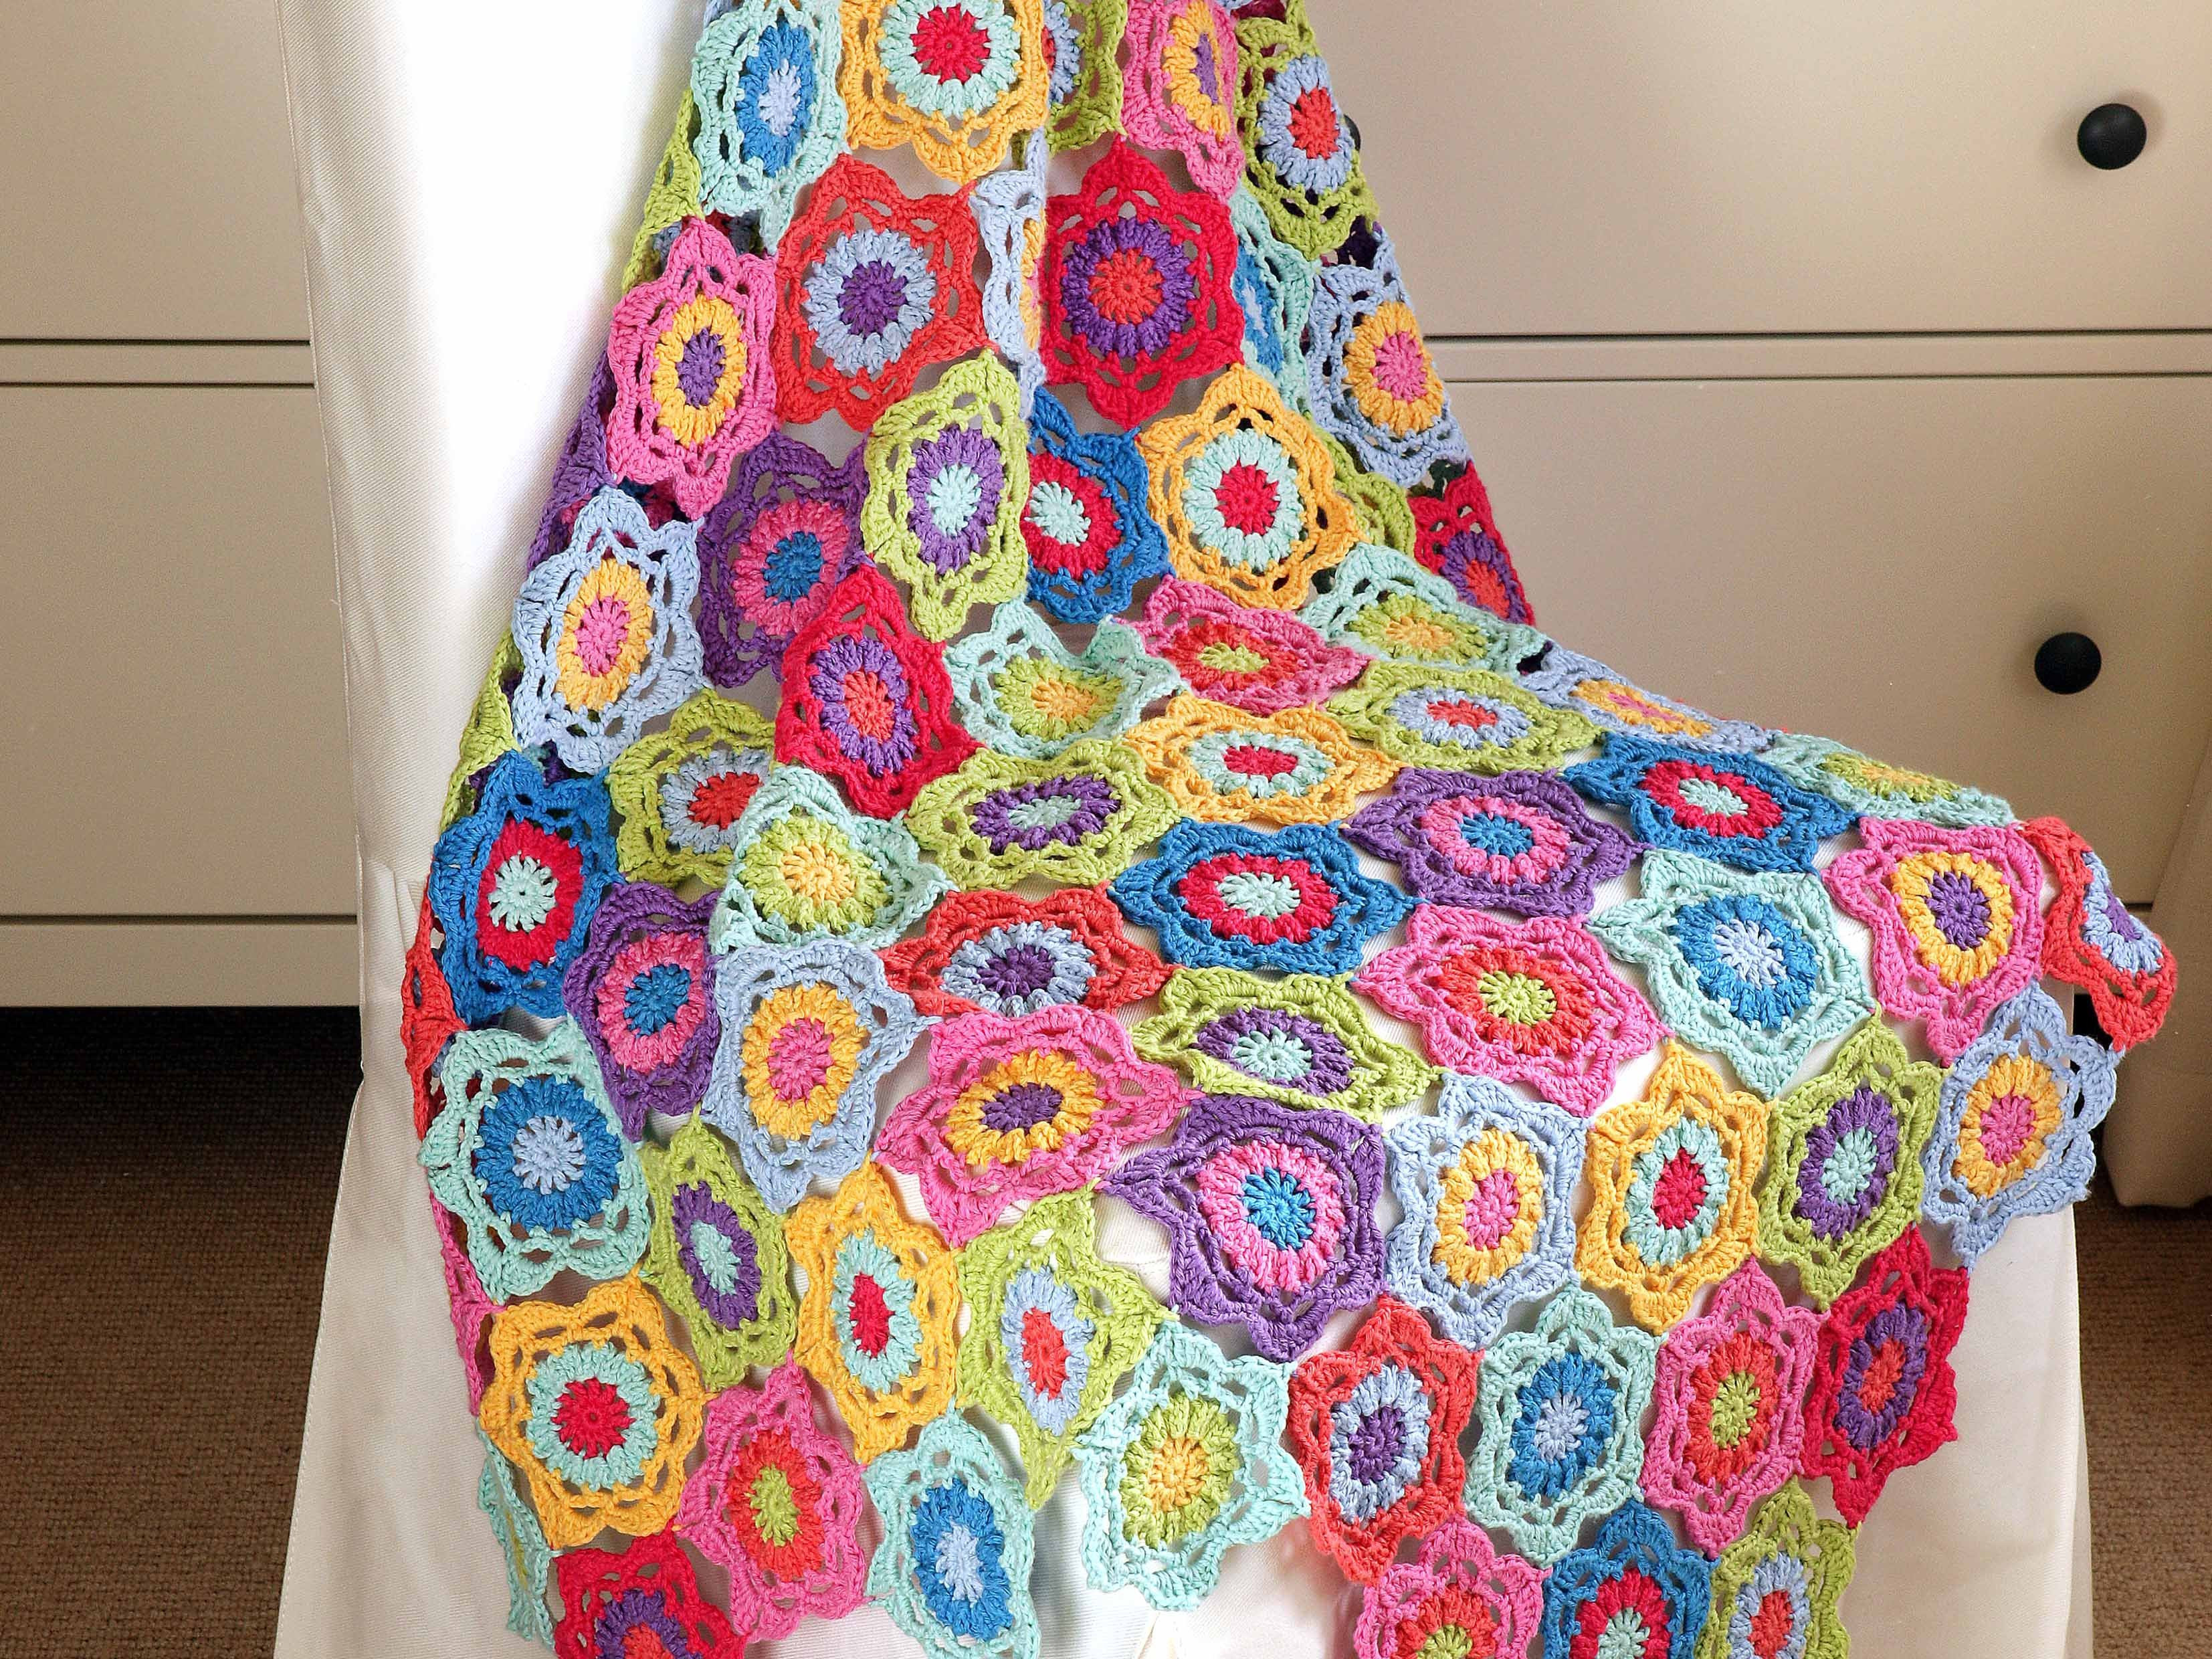 Scheepjes Hearts In Bloom Blanket Kit - Crochet for Home Kits at